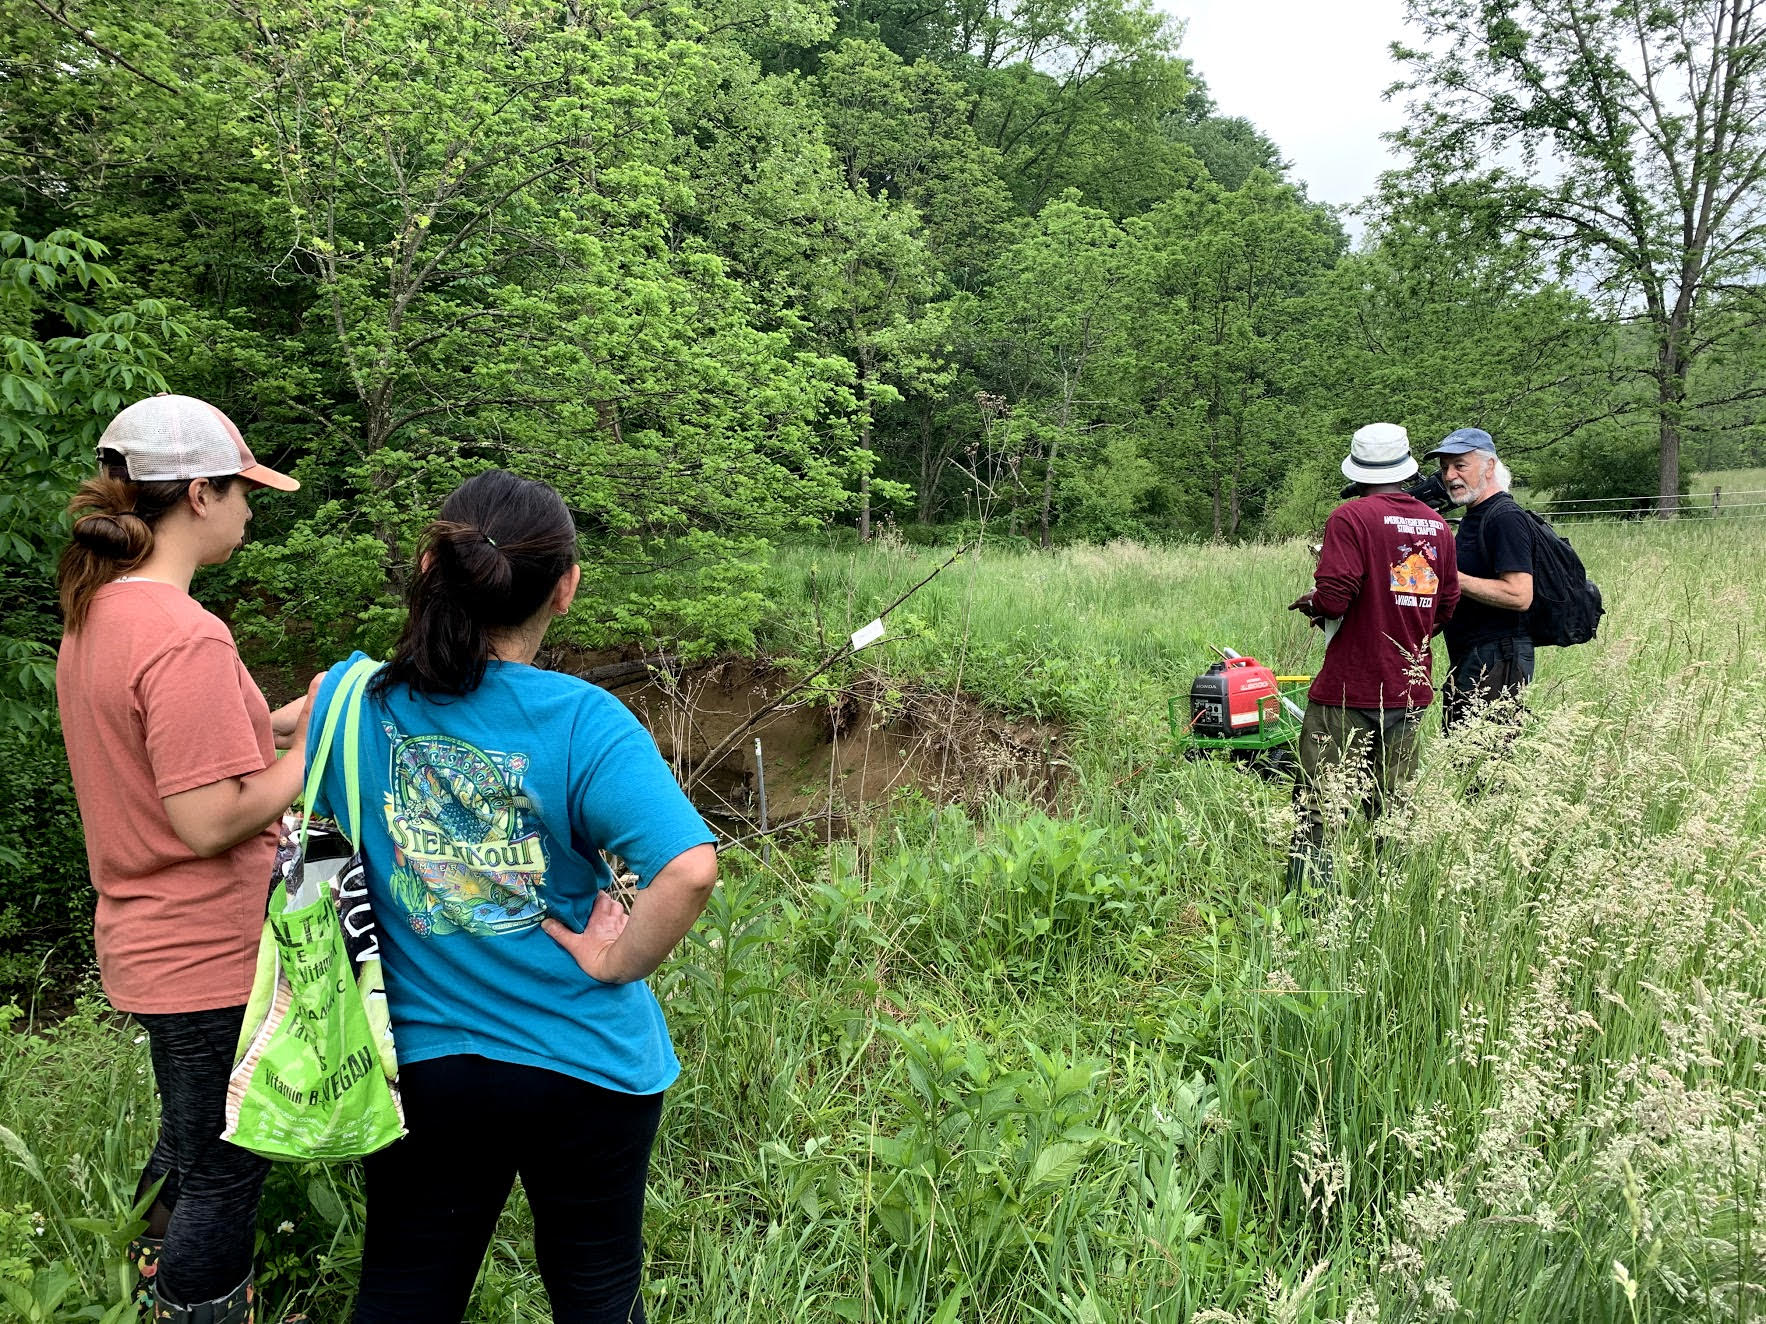 This photo shows in the foreground, and from the back, two women with hair in ponytails and farther from the camera two men, one from the back and one from the side, engaged in conversation. All are standing in a meadow near a creek bank. It appears to be high summer--everything is green and lush--and t-shirt colors include blue, salmon, maroon, and black.